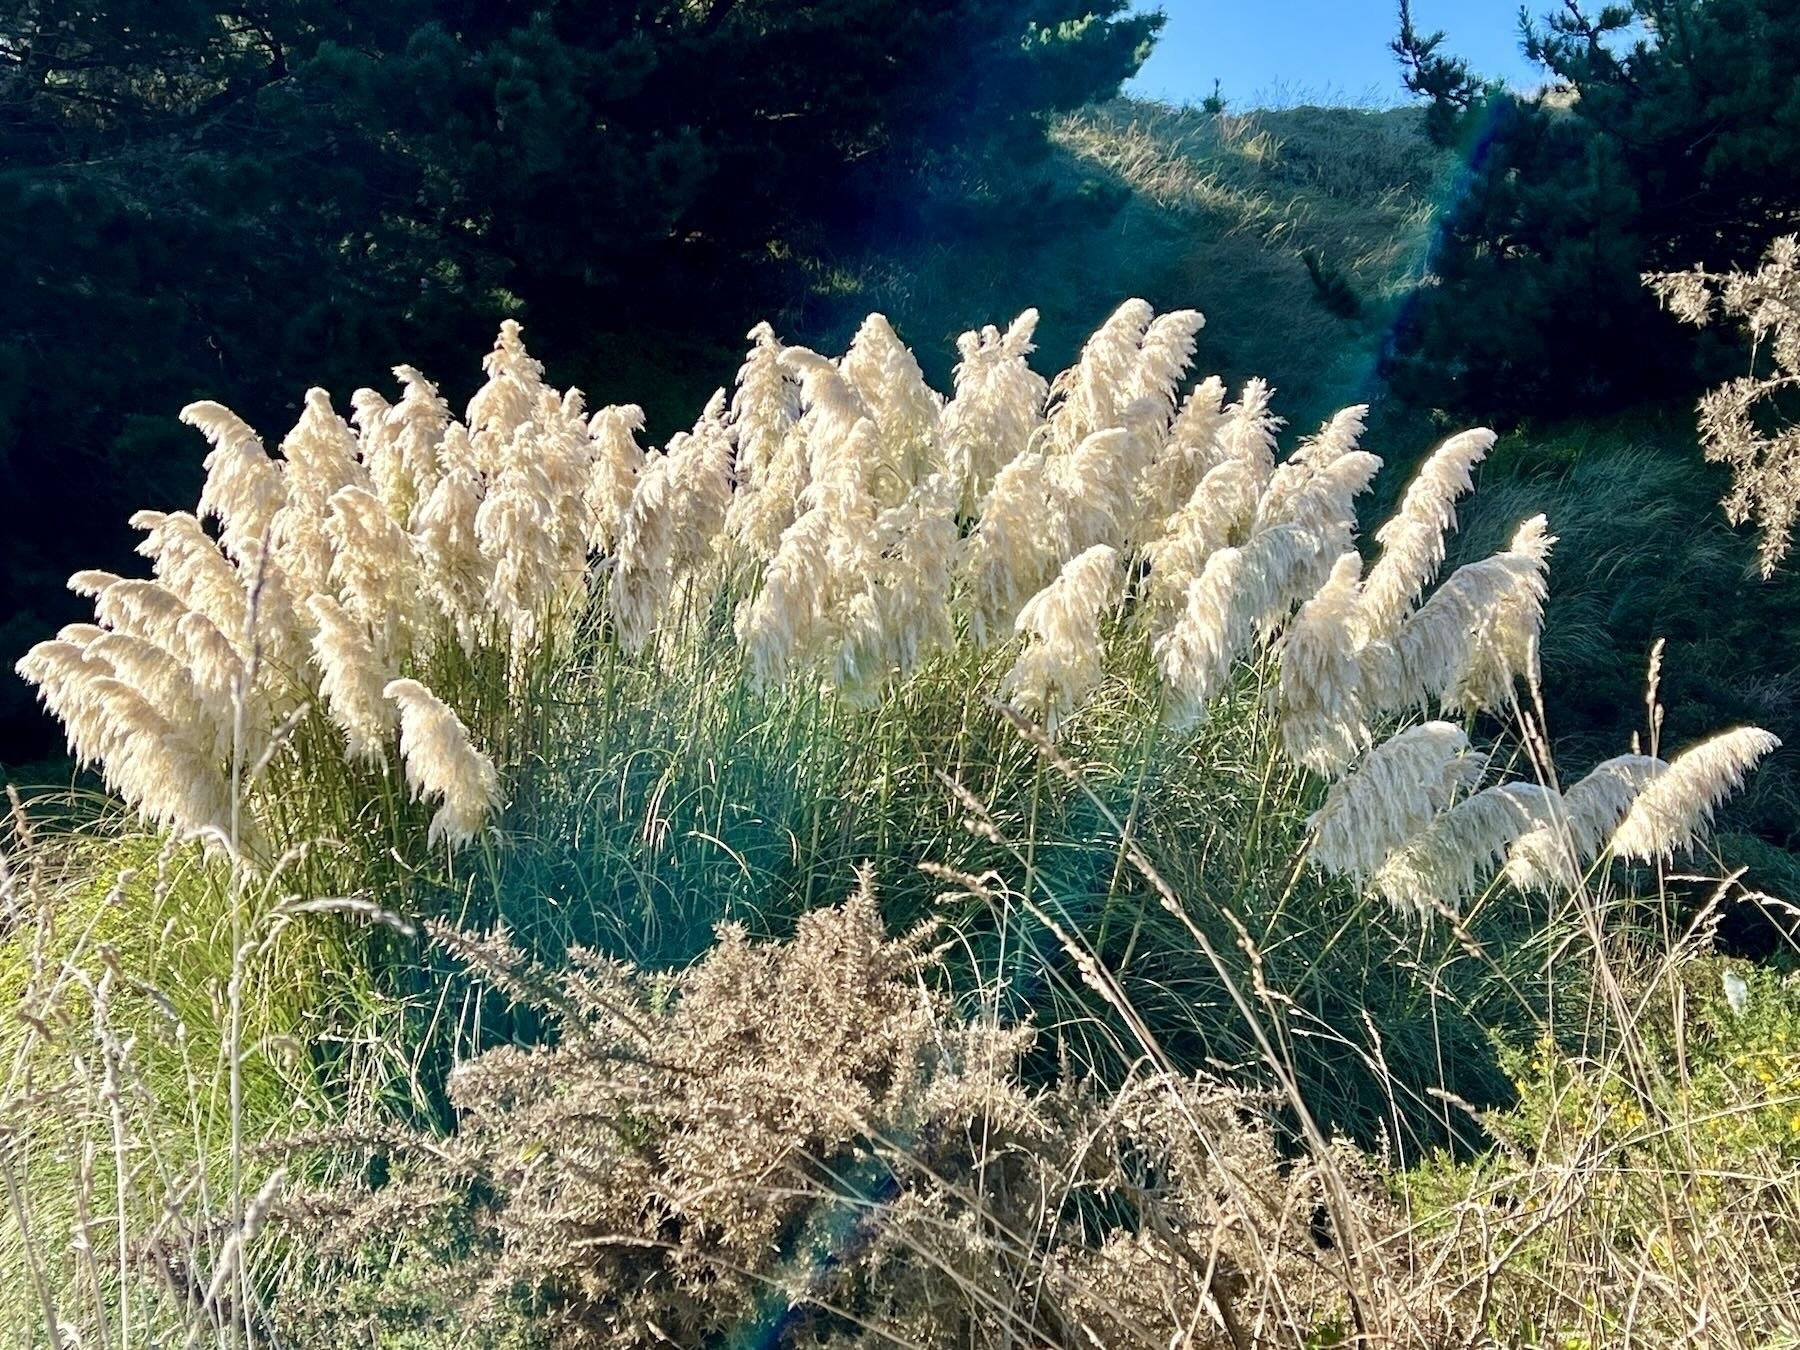 A big clump of Pampas or toitoi grass with white feathery fronds.